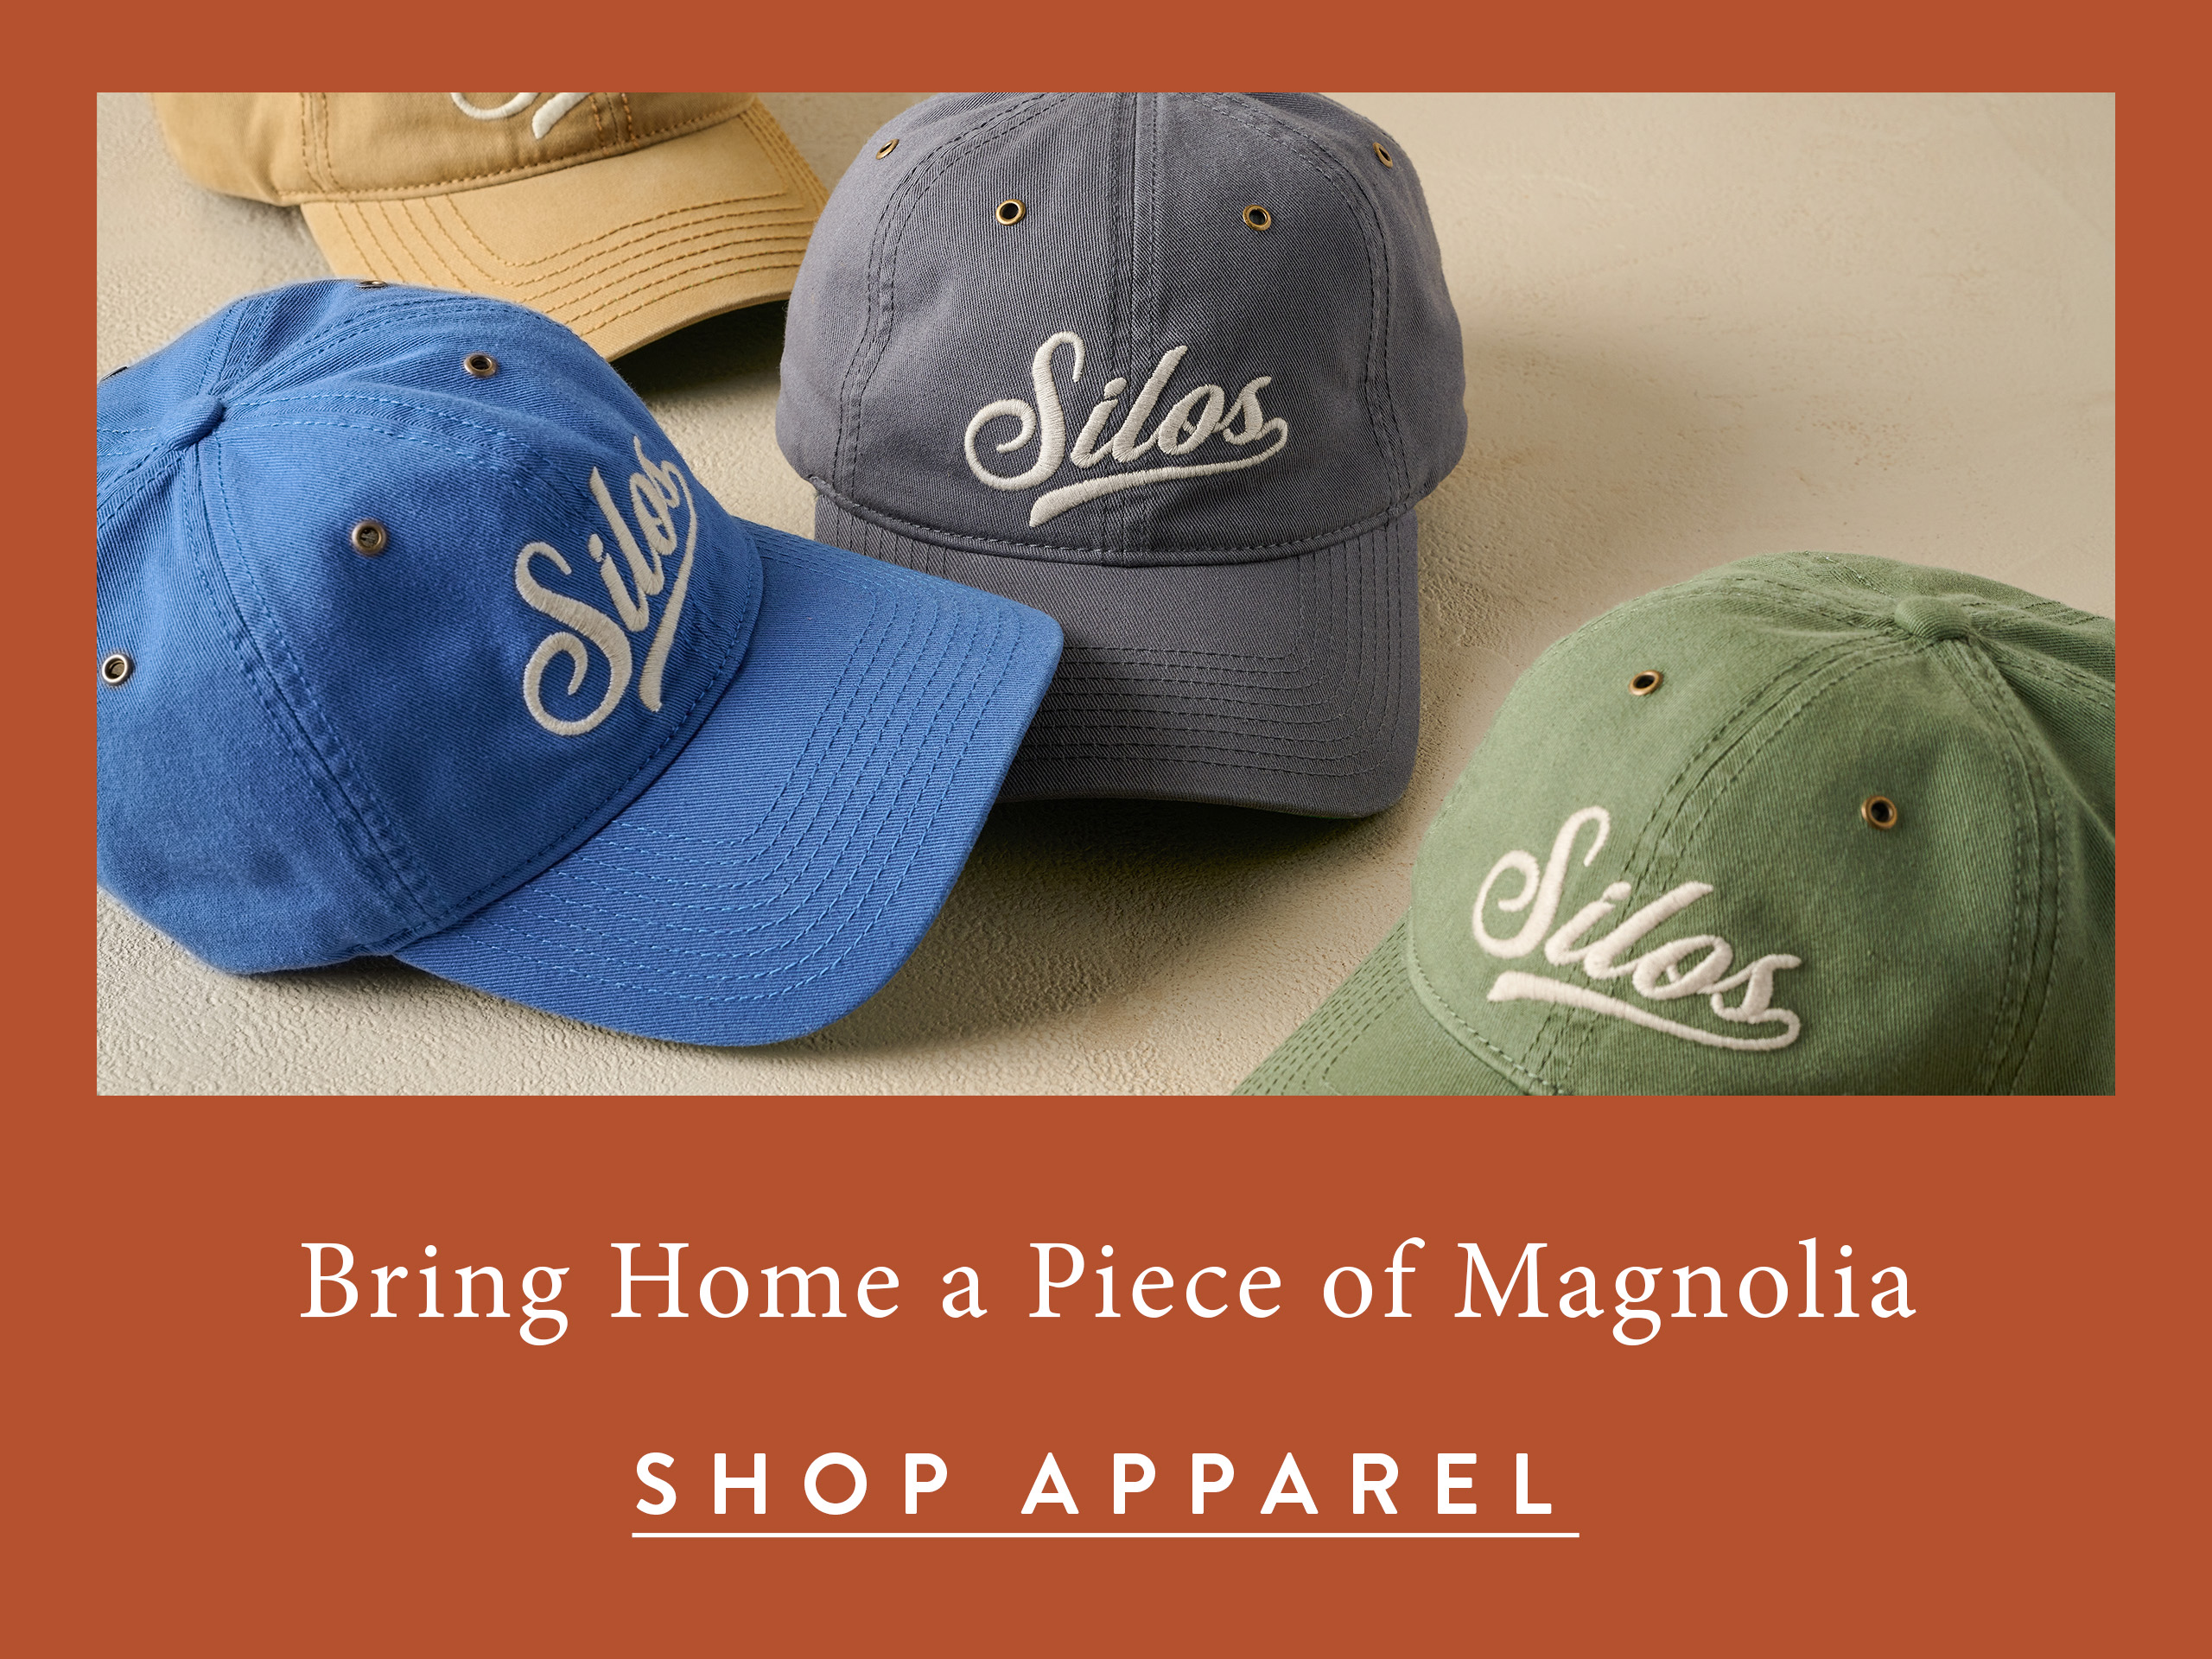 bring home a piece of magnola - shop apparel. three hats pictured